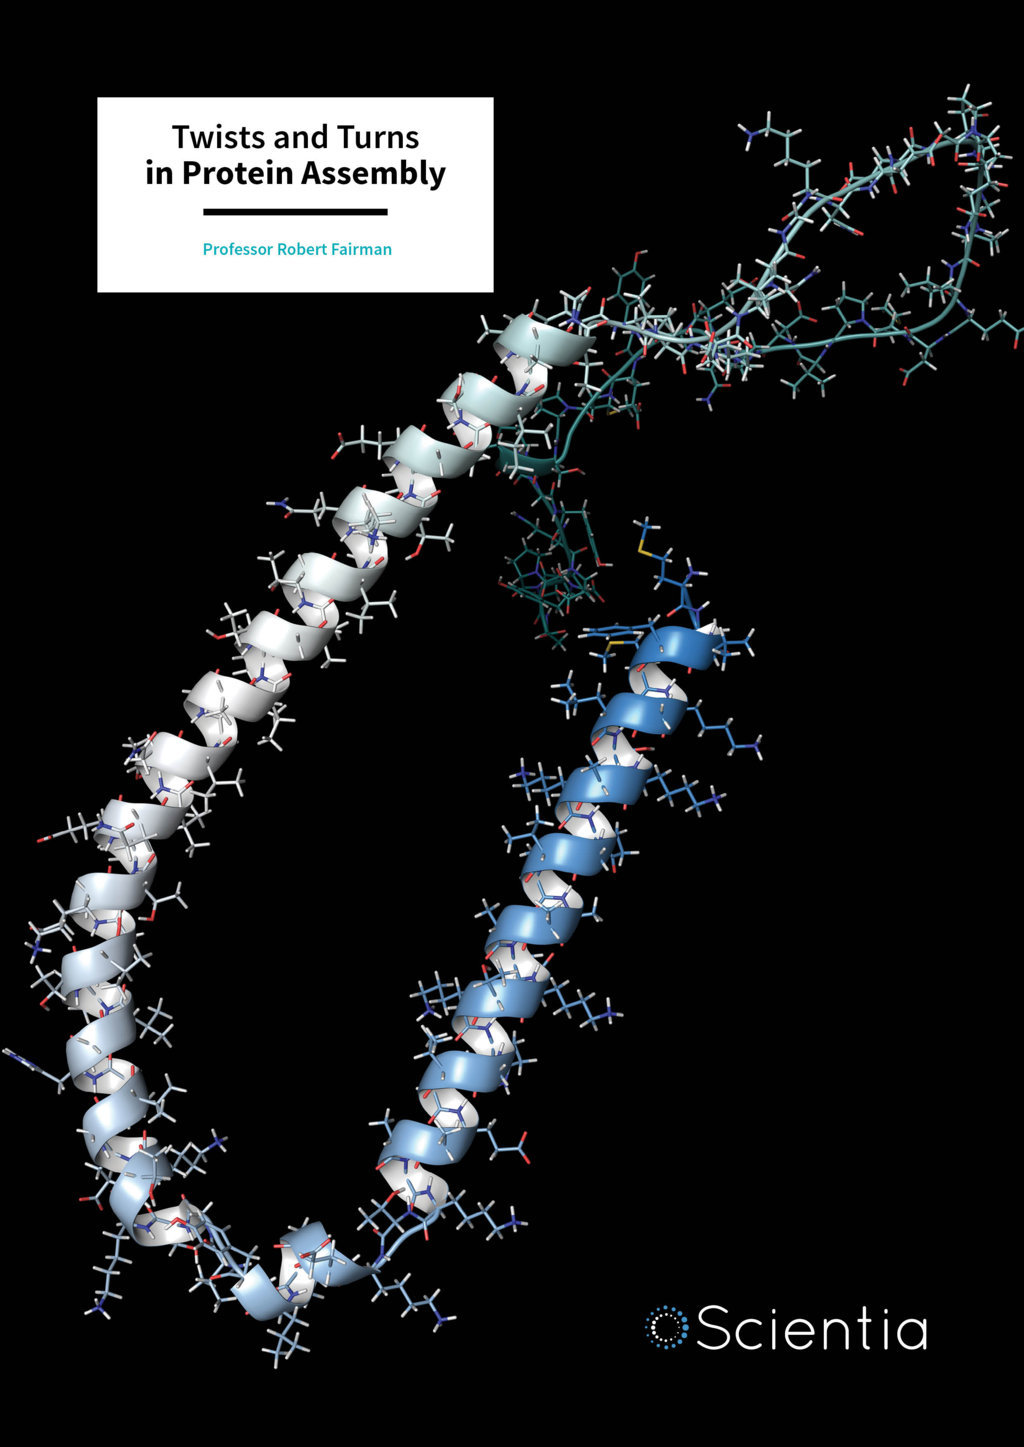 Professor Robert Fairman – Twists and Turns in Protein Assembly